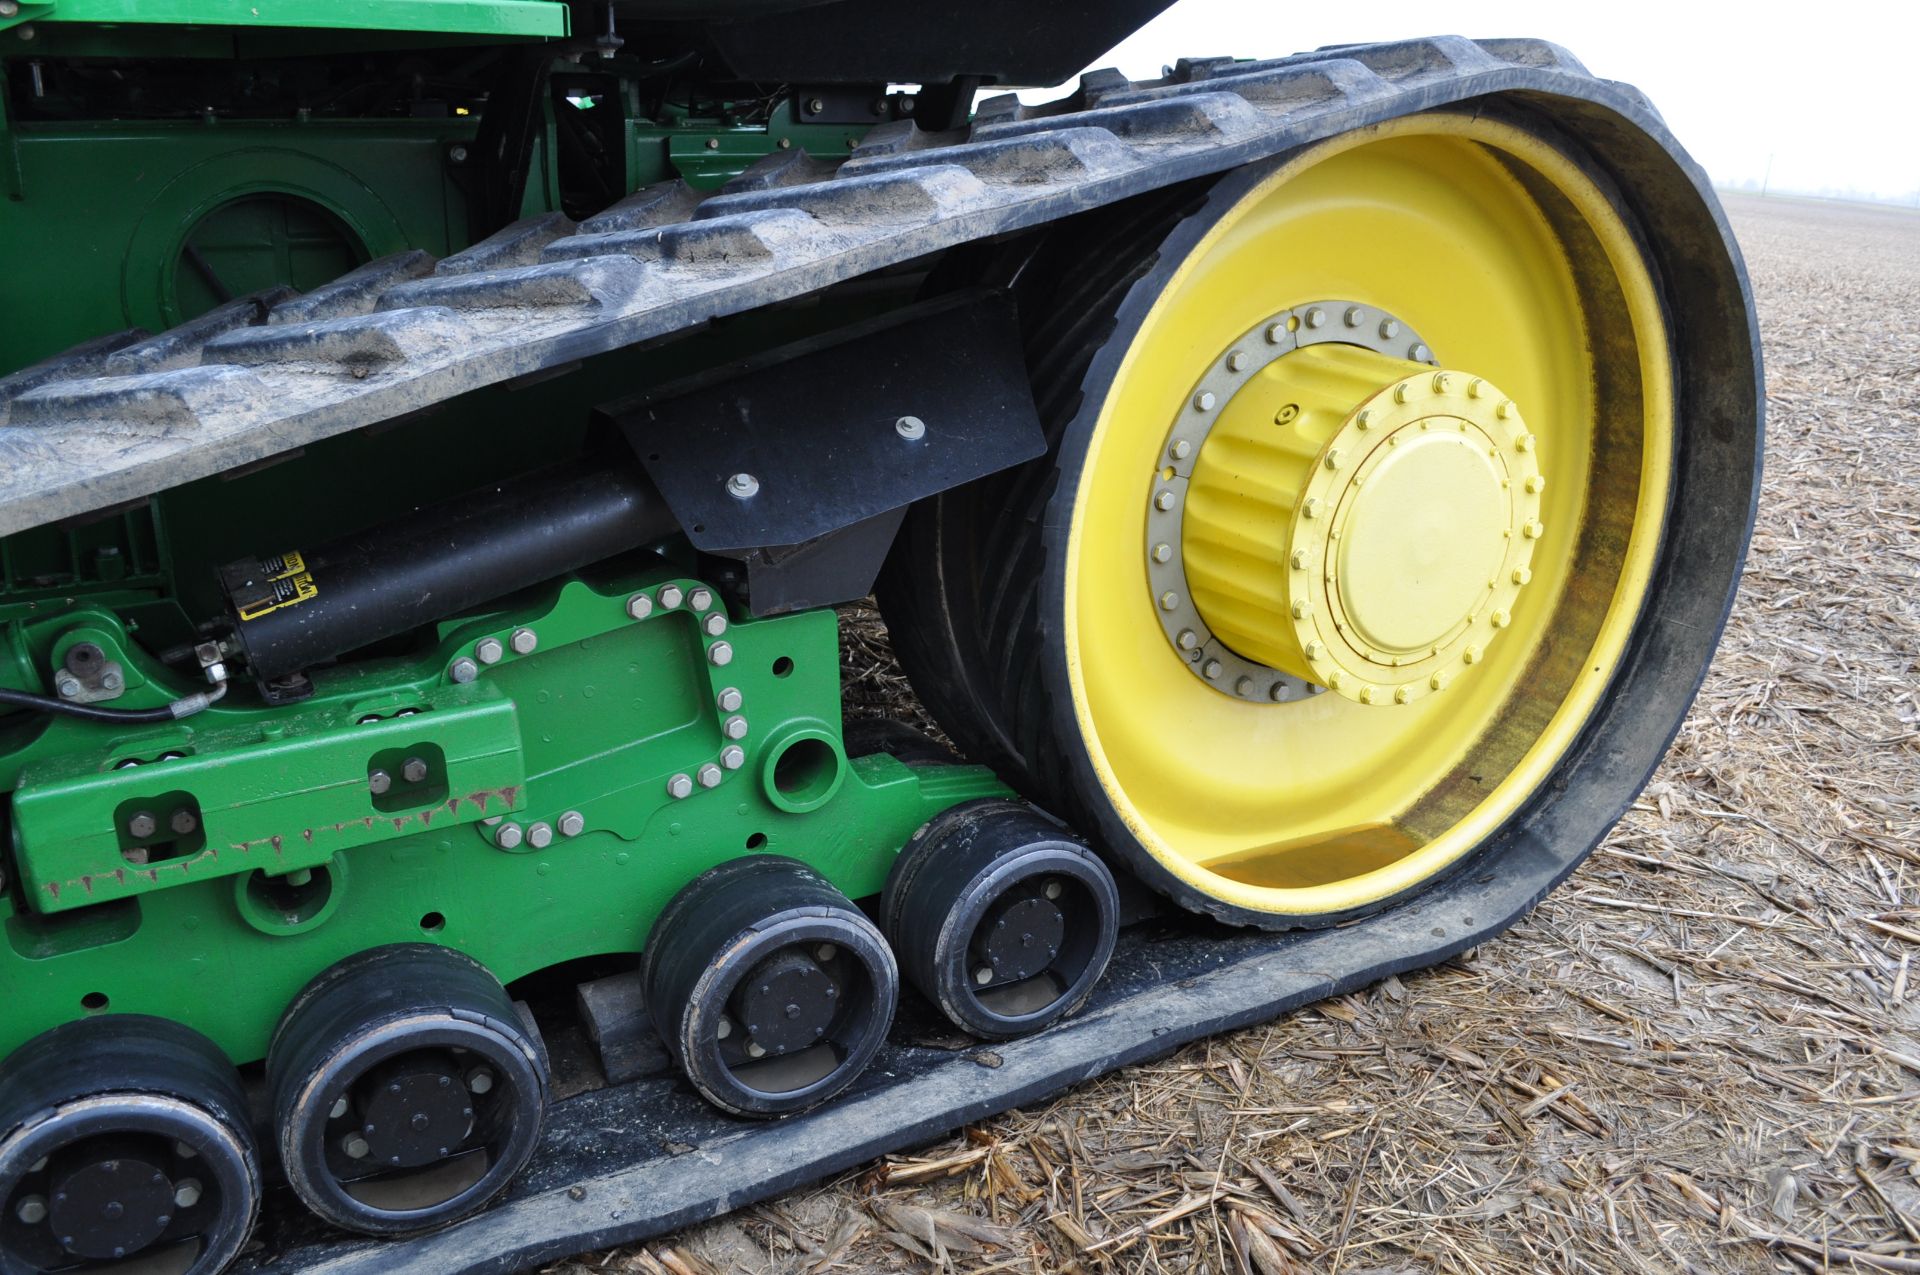 John Deere 9510RT track tractor, 36” belts, front weights, Powershift, 5 hyd remotes, 1000 PTO - Image 10 of 34